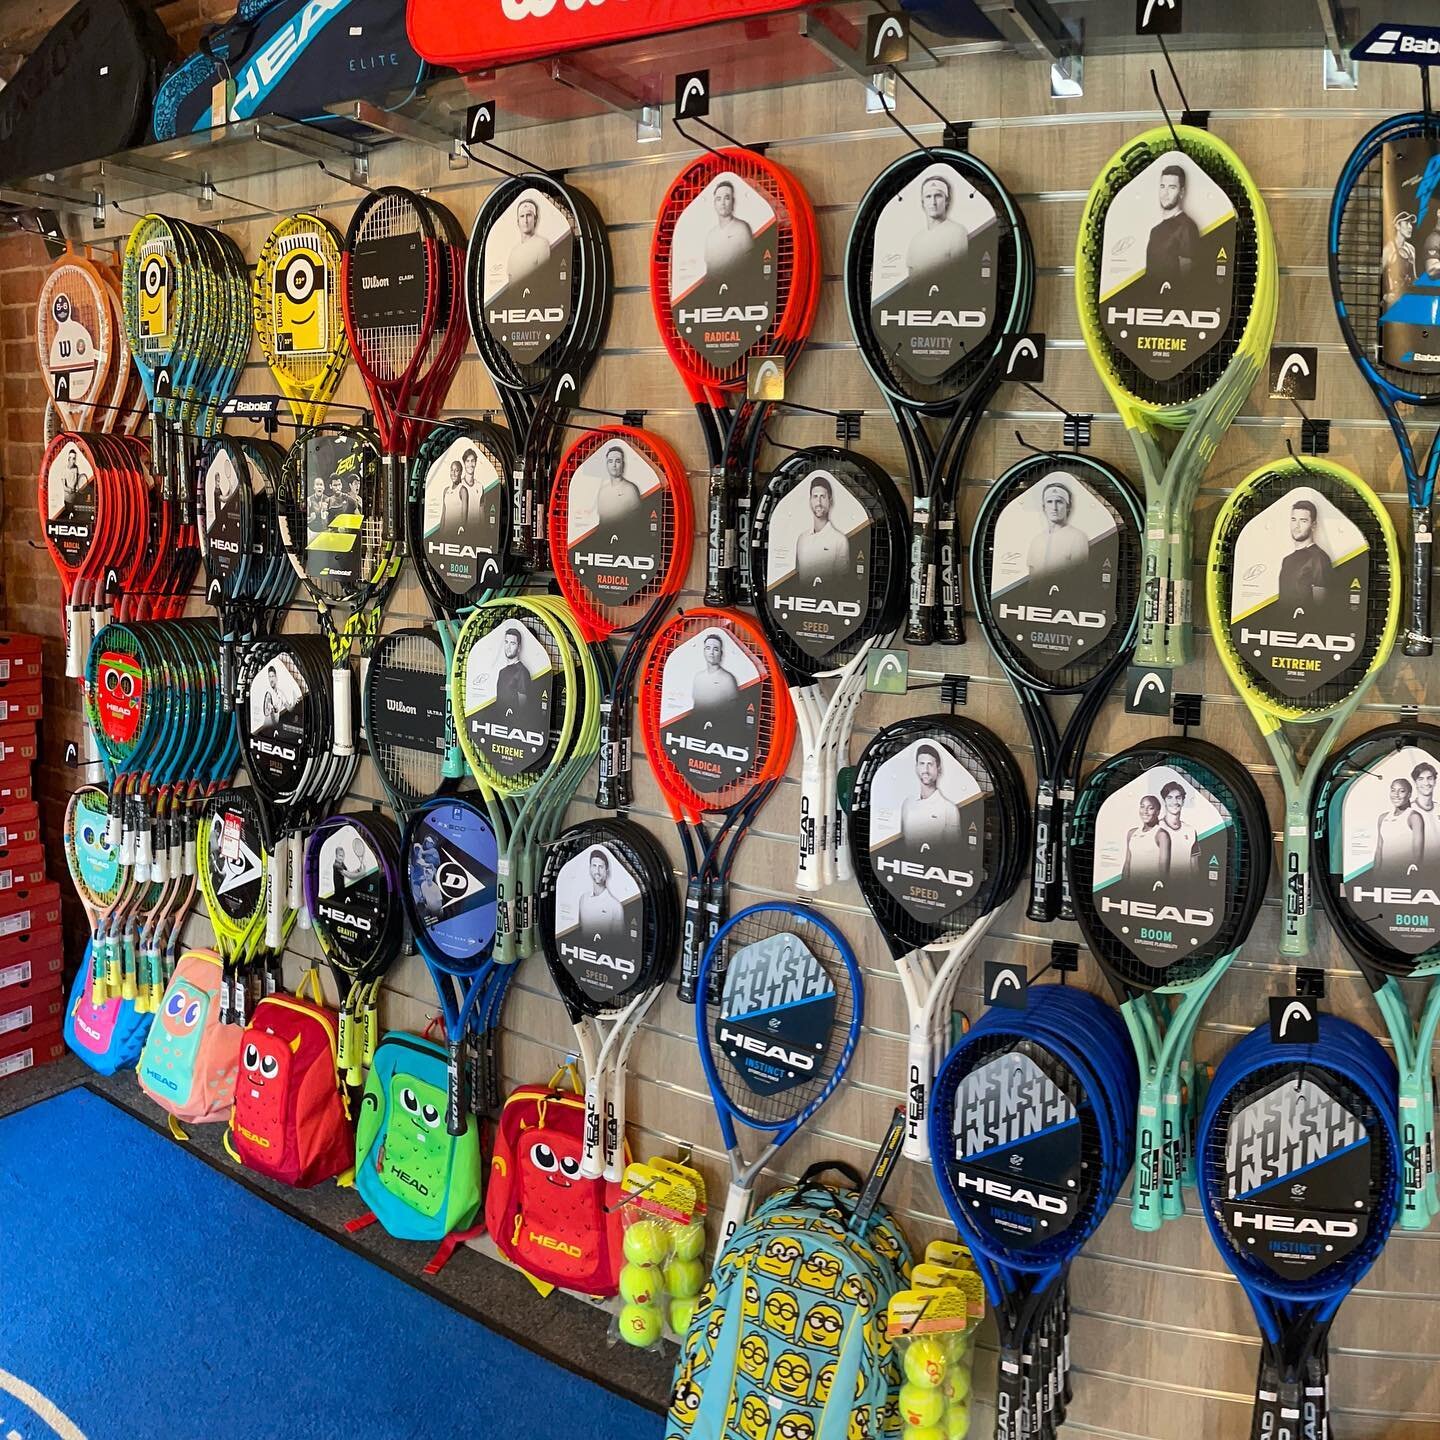 🌟 Our wall of rackets 🌟 

There&rsquo;s a racket for every player.